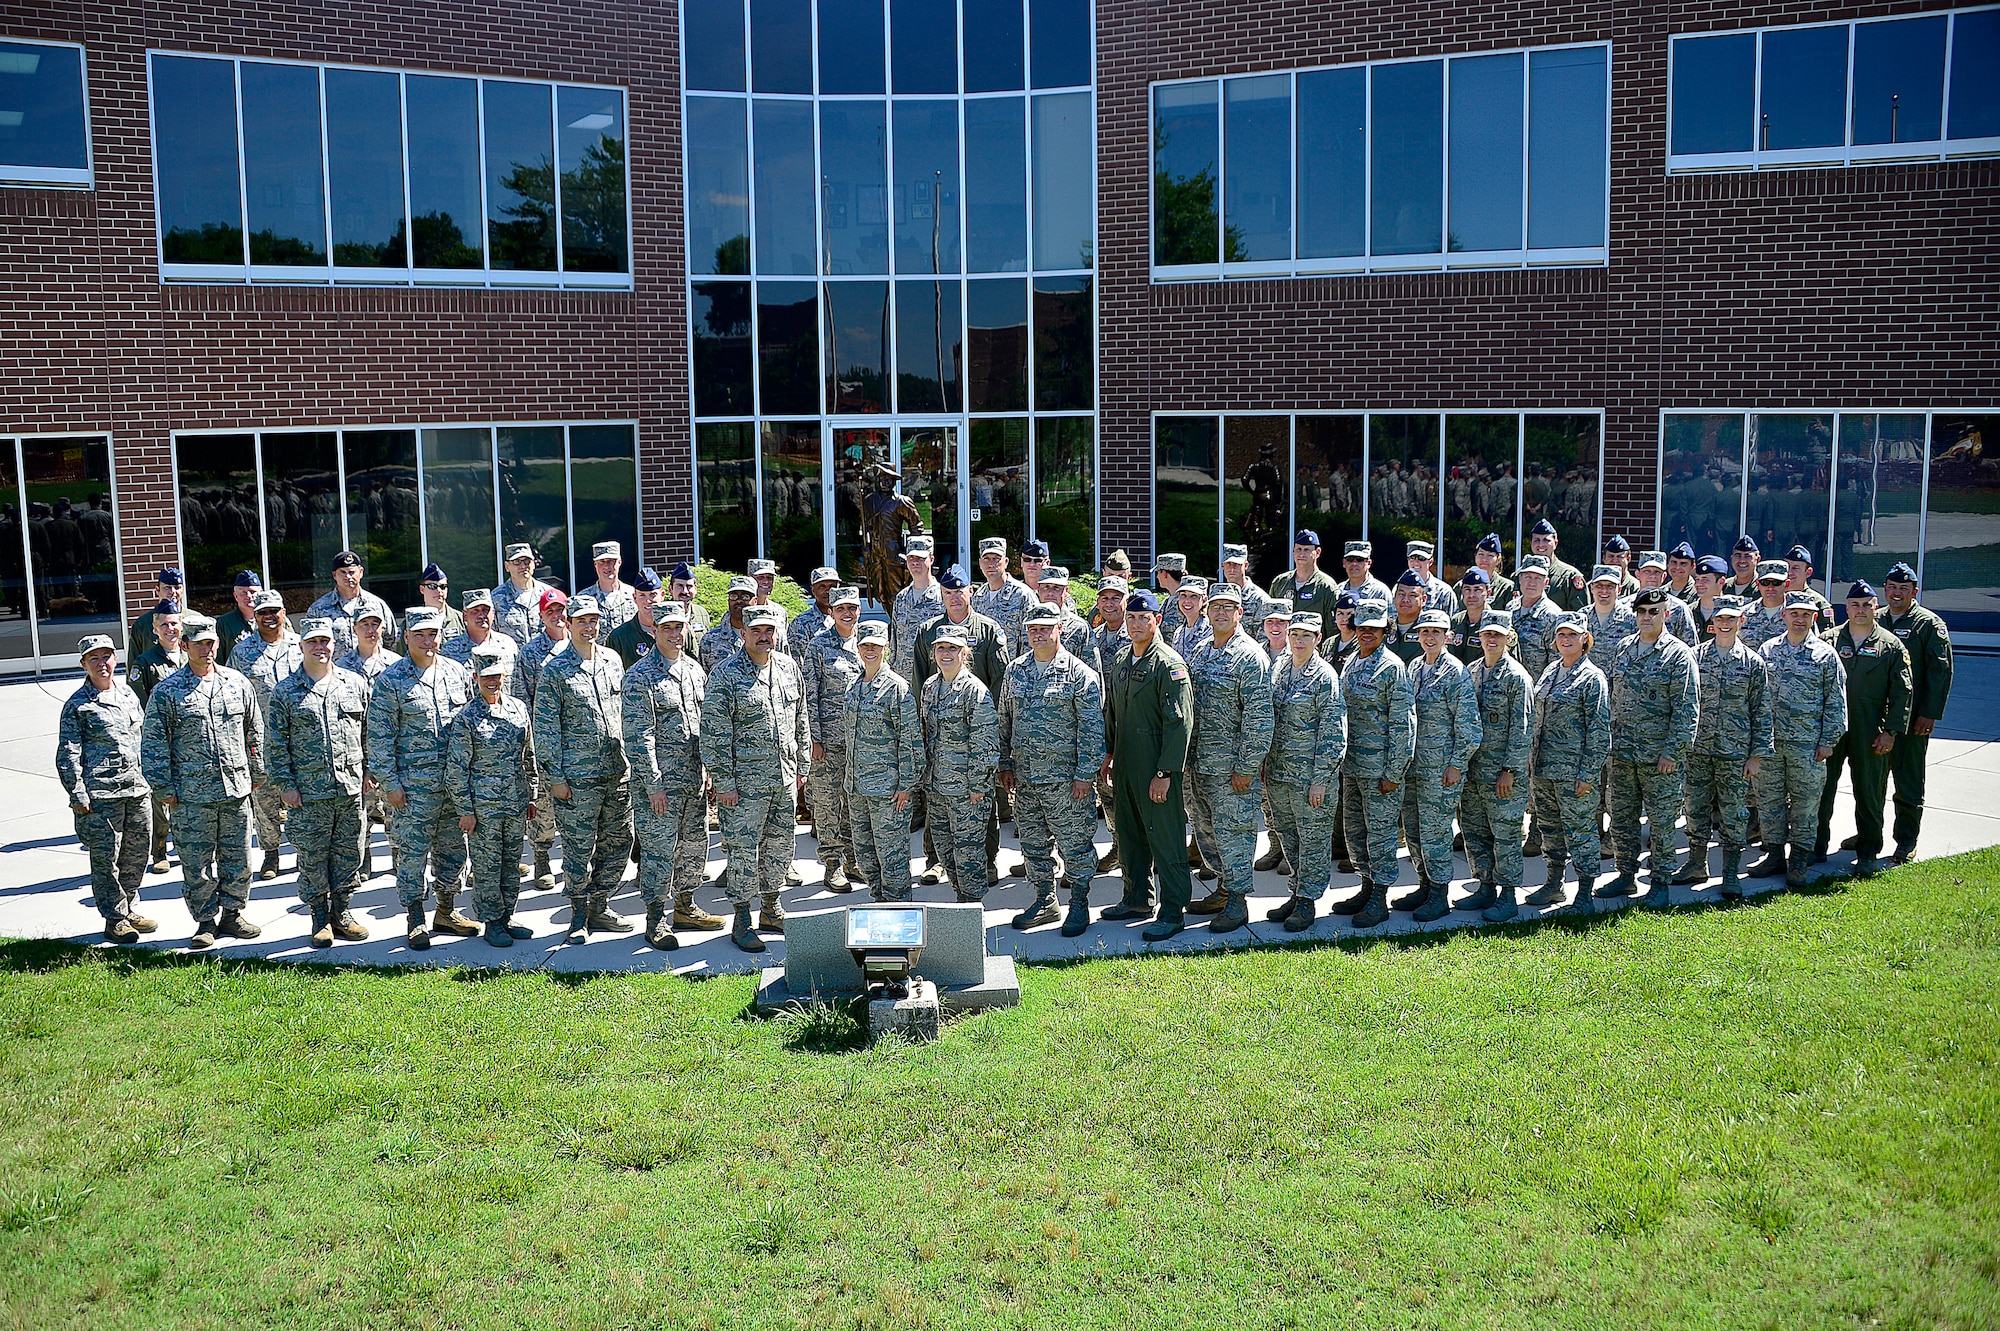 MCGHEE TYSON AIR NATIONAL GUARD BASE, Tenn. - More than 60 lieutenant colonels studying with the Air War College seminar at the I.G. Brown Training and Education Center here, June 4, 2015, form up outside Patriot Hall for their group photos. The officers were part of the AWC's fourth seminar on campus for the Air National Guard and Air Force Reserve Command, which included one Marine Corps officer in attendance. (U.S. Air National Guard photo by Master Sgt. Mike R. Smith/Released) 